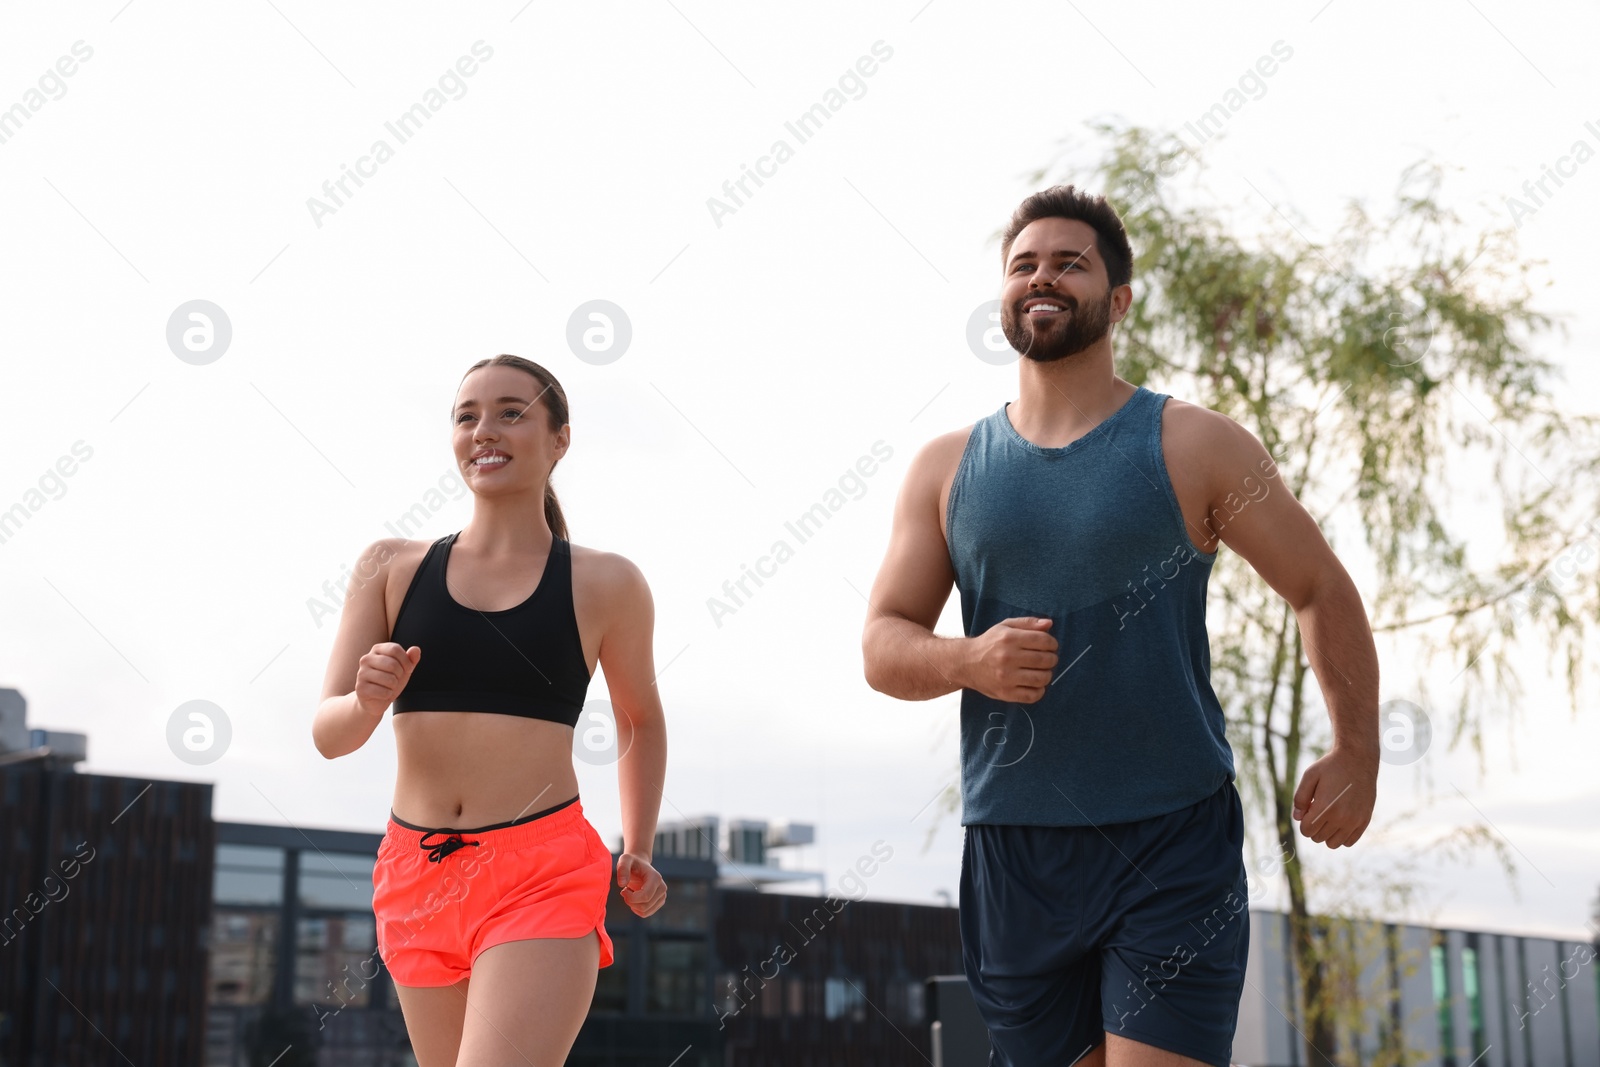 Photo of Healthy lifestyle. Happy young couple running outdoors